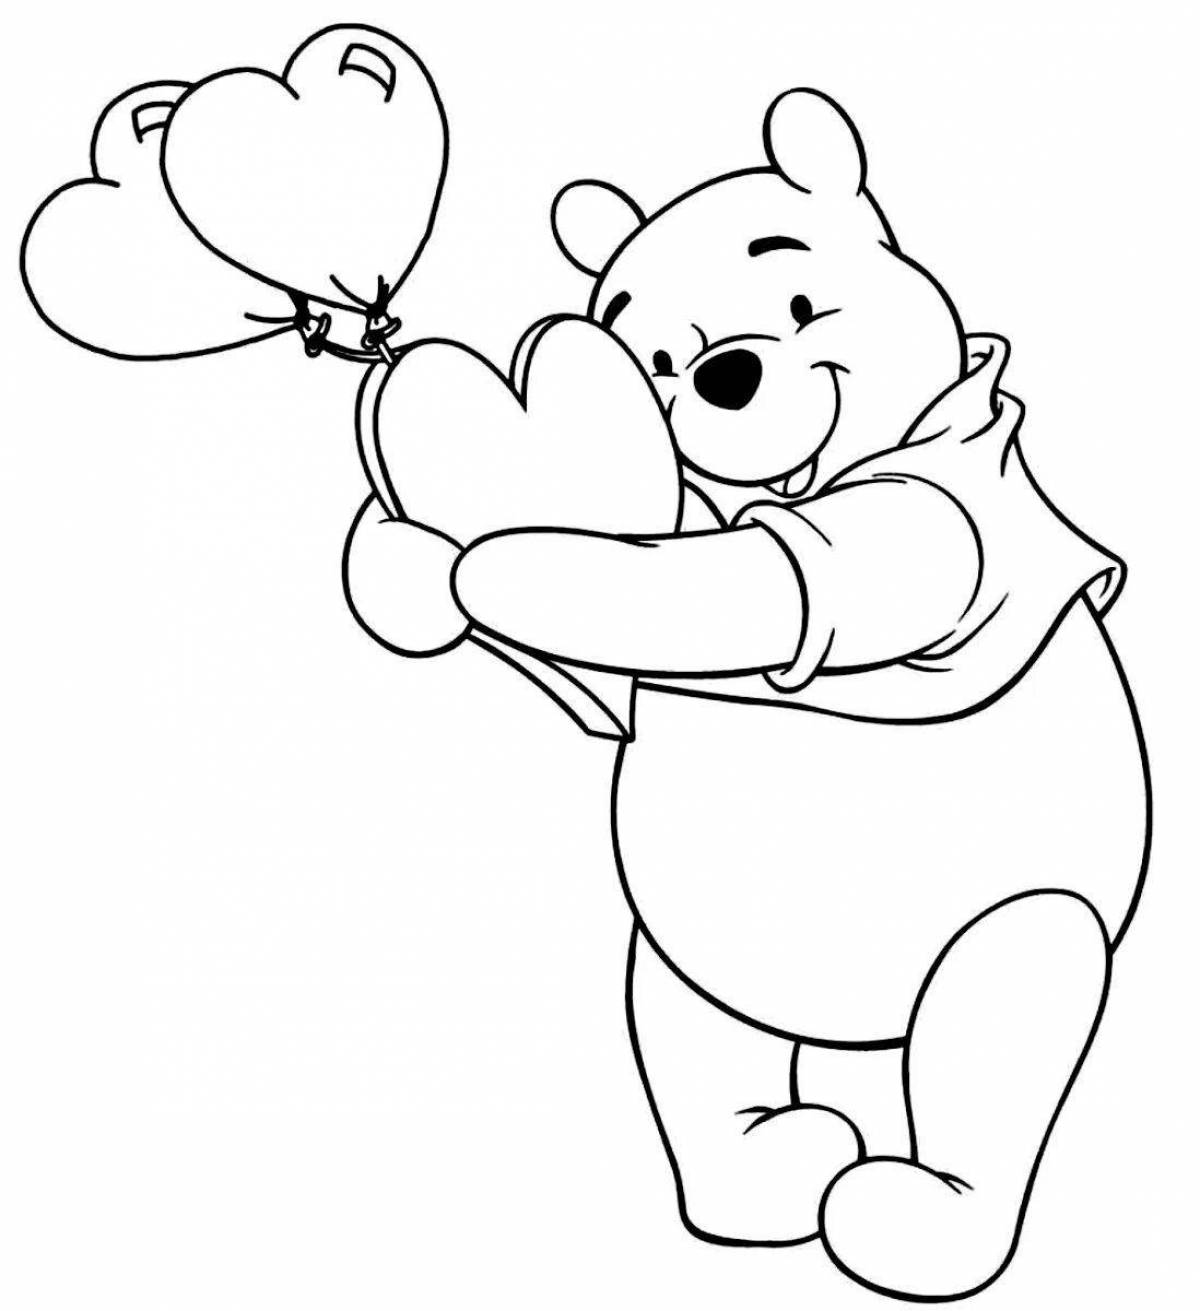 Playful Winnie the Pooh with a balloon